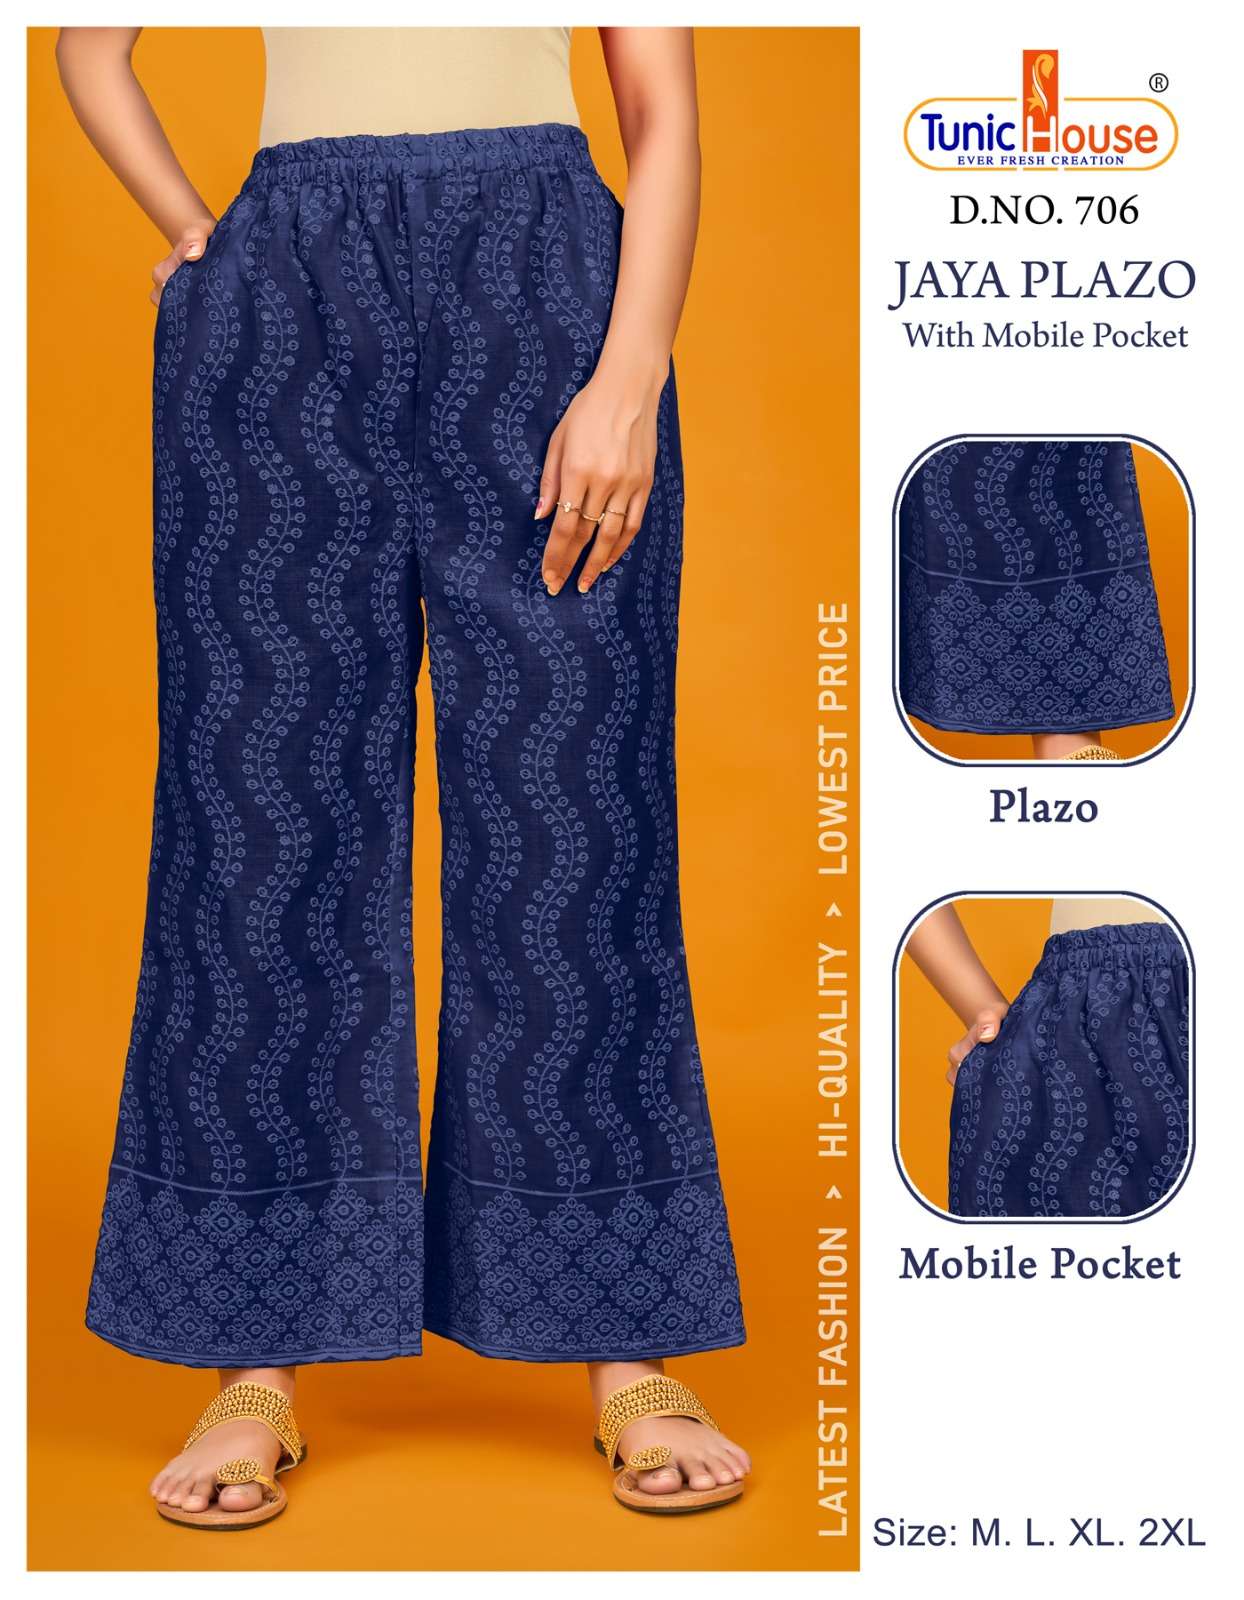 8 Palazzo Pants Style That Every Women Should Try